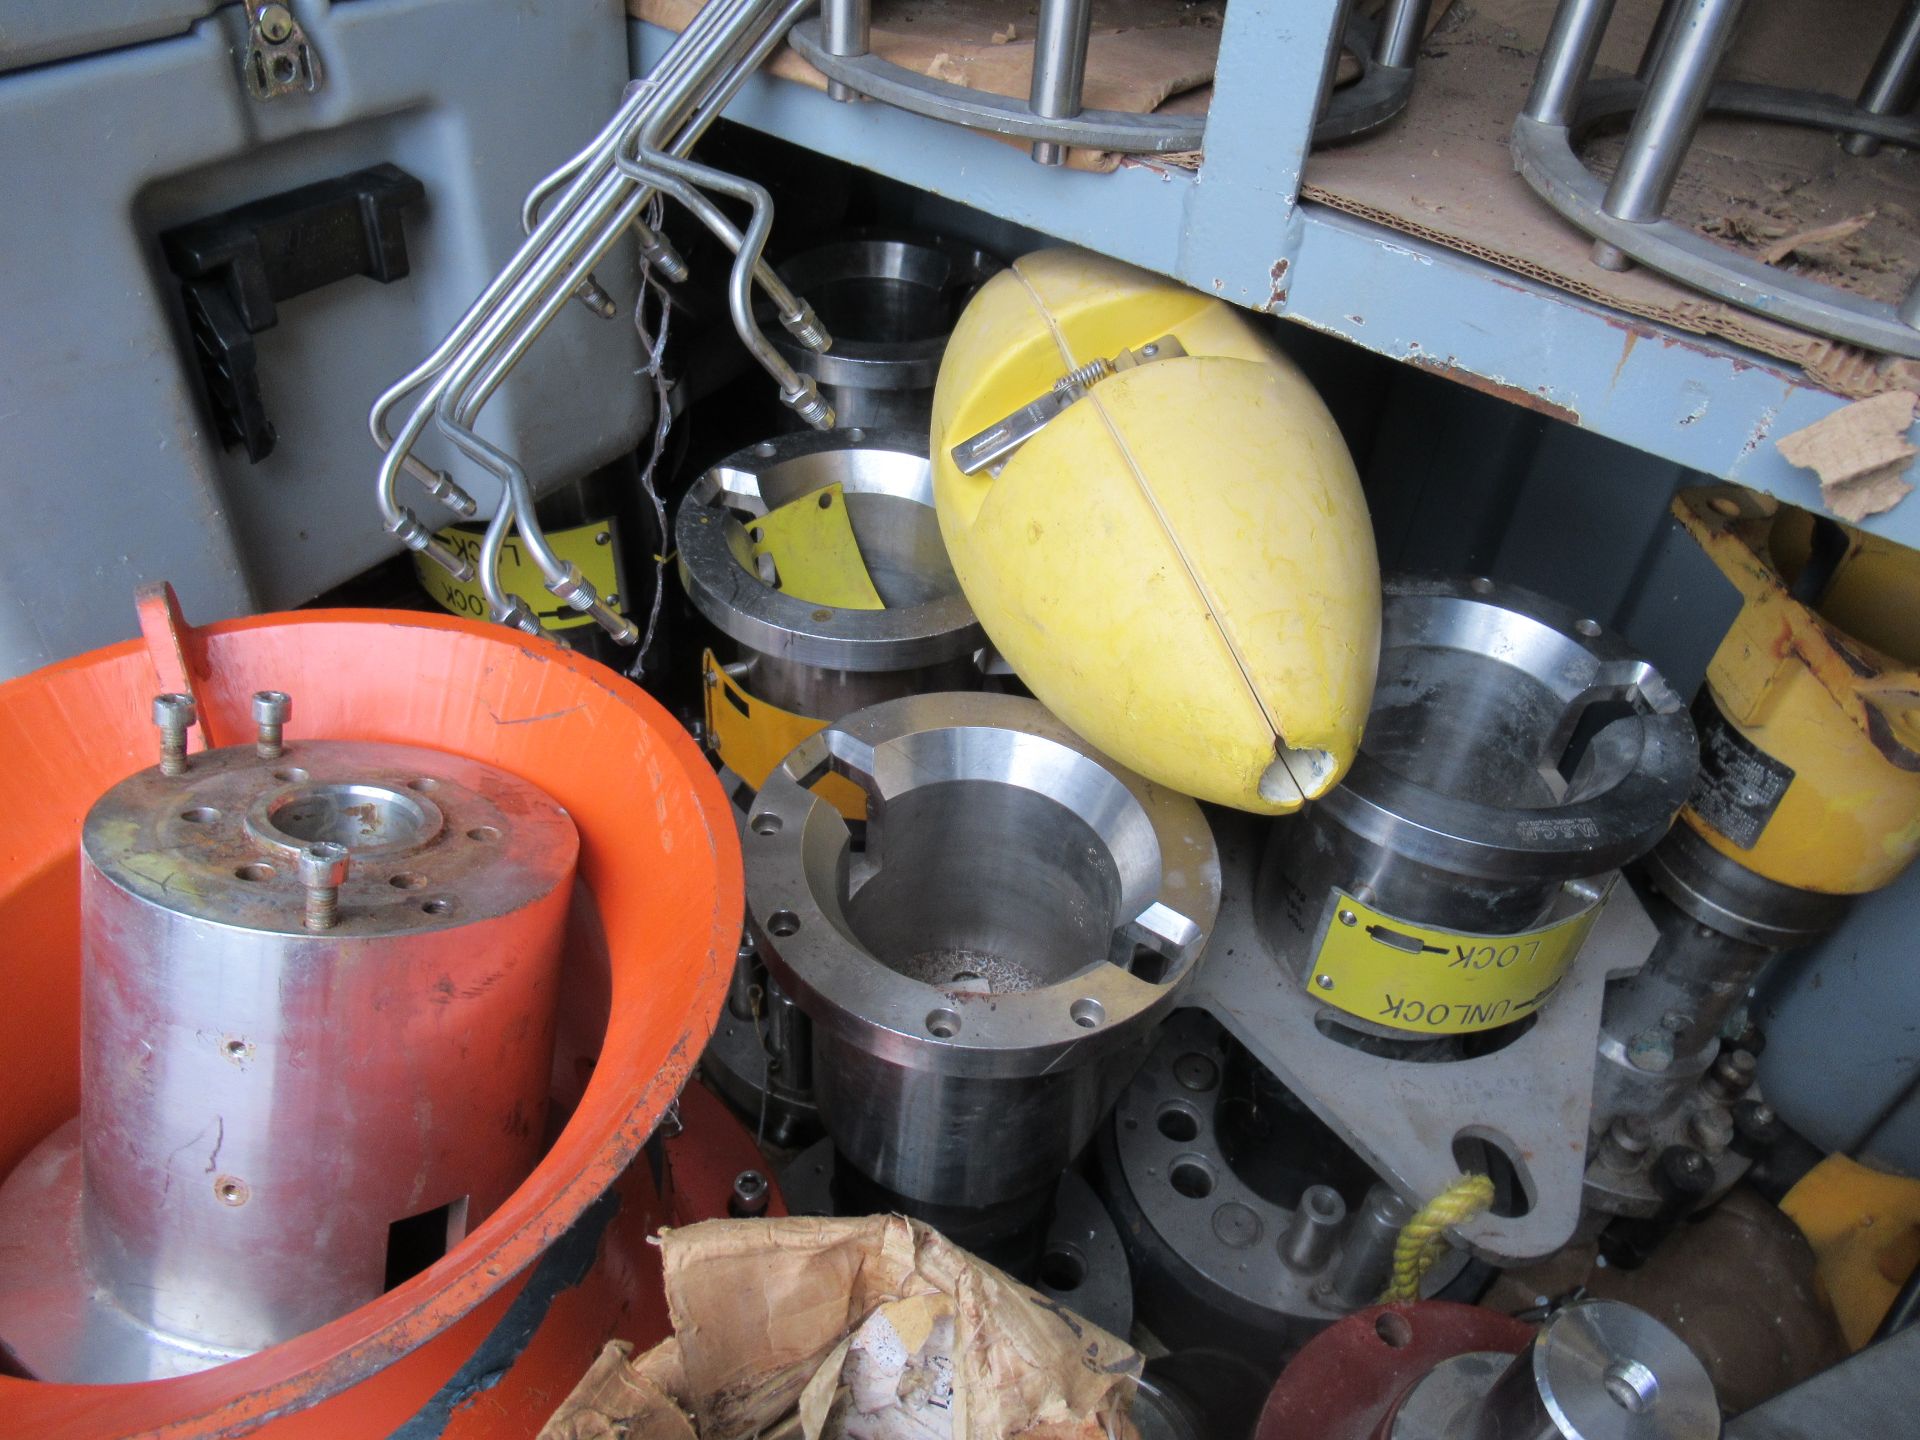 LOT CONSISTING OF 8’ X 4’ SEA CONTAINER AND CONTENTS, including subsea connectors and umbilical - Image 12 of 14